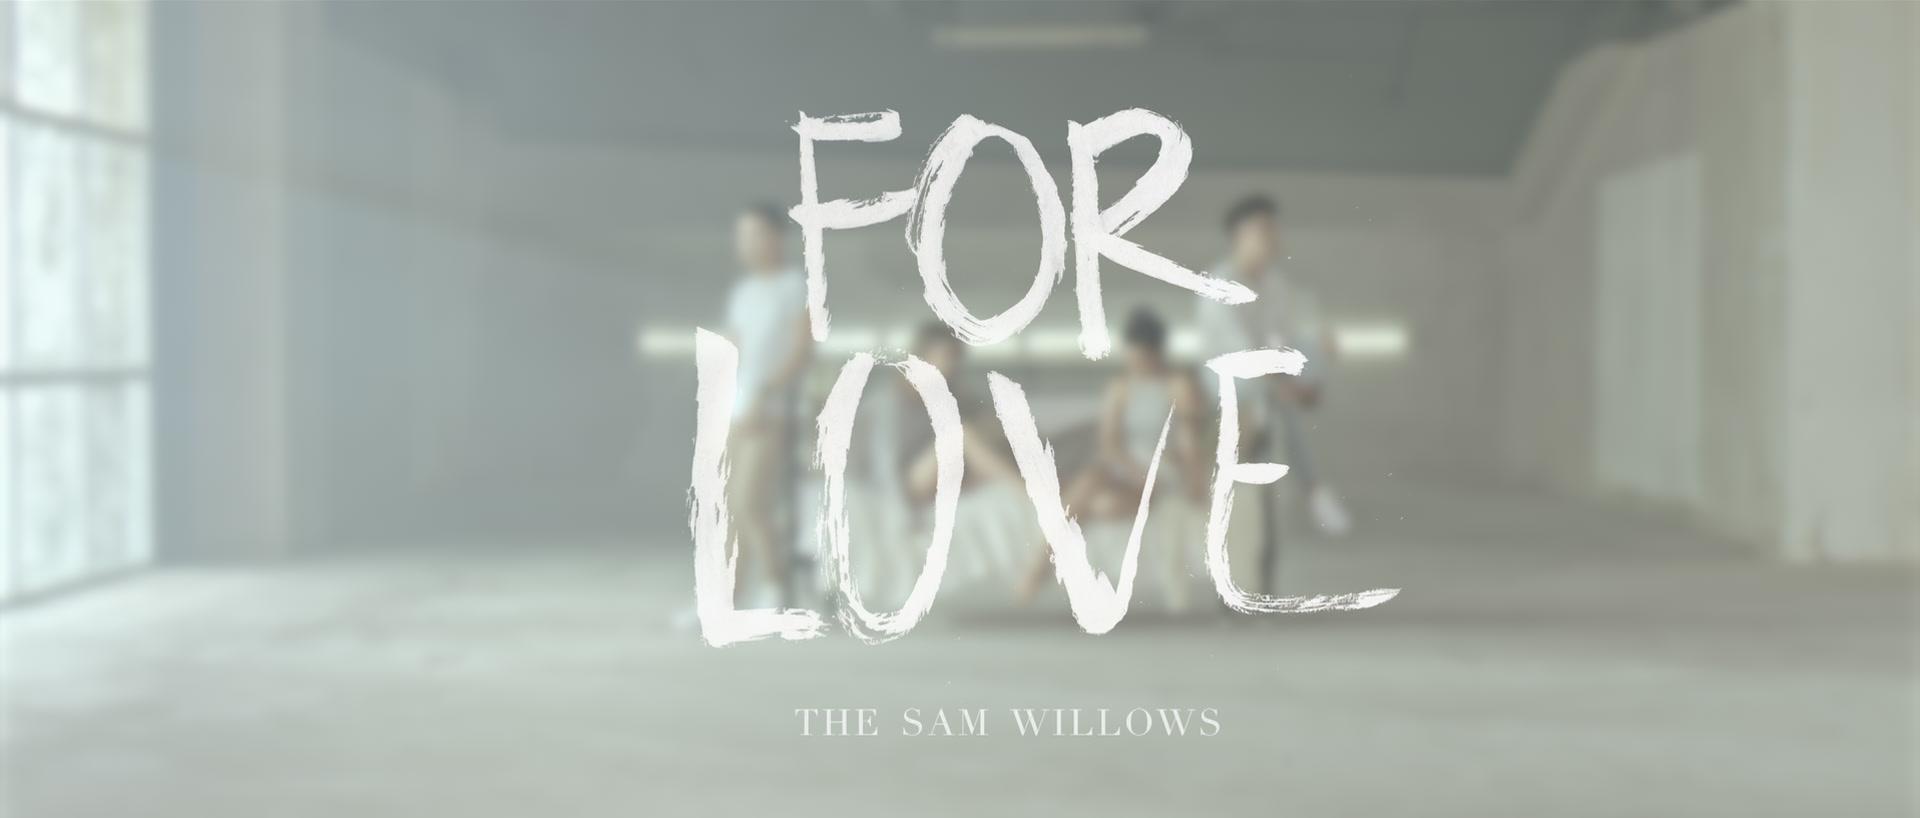 The Sam Willows - For Love (Official Music Video)